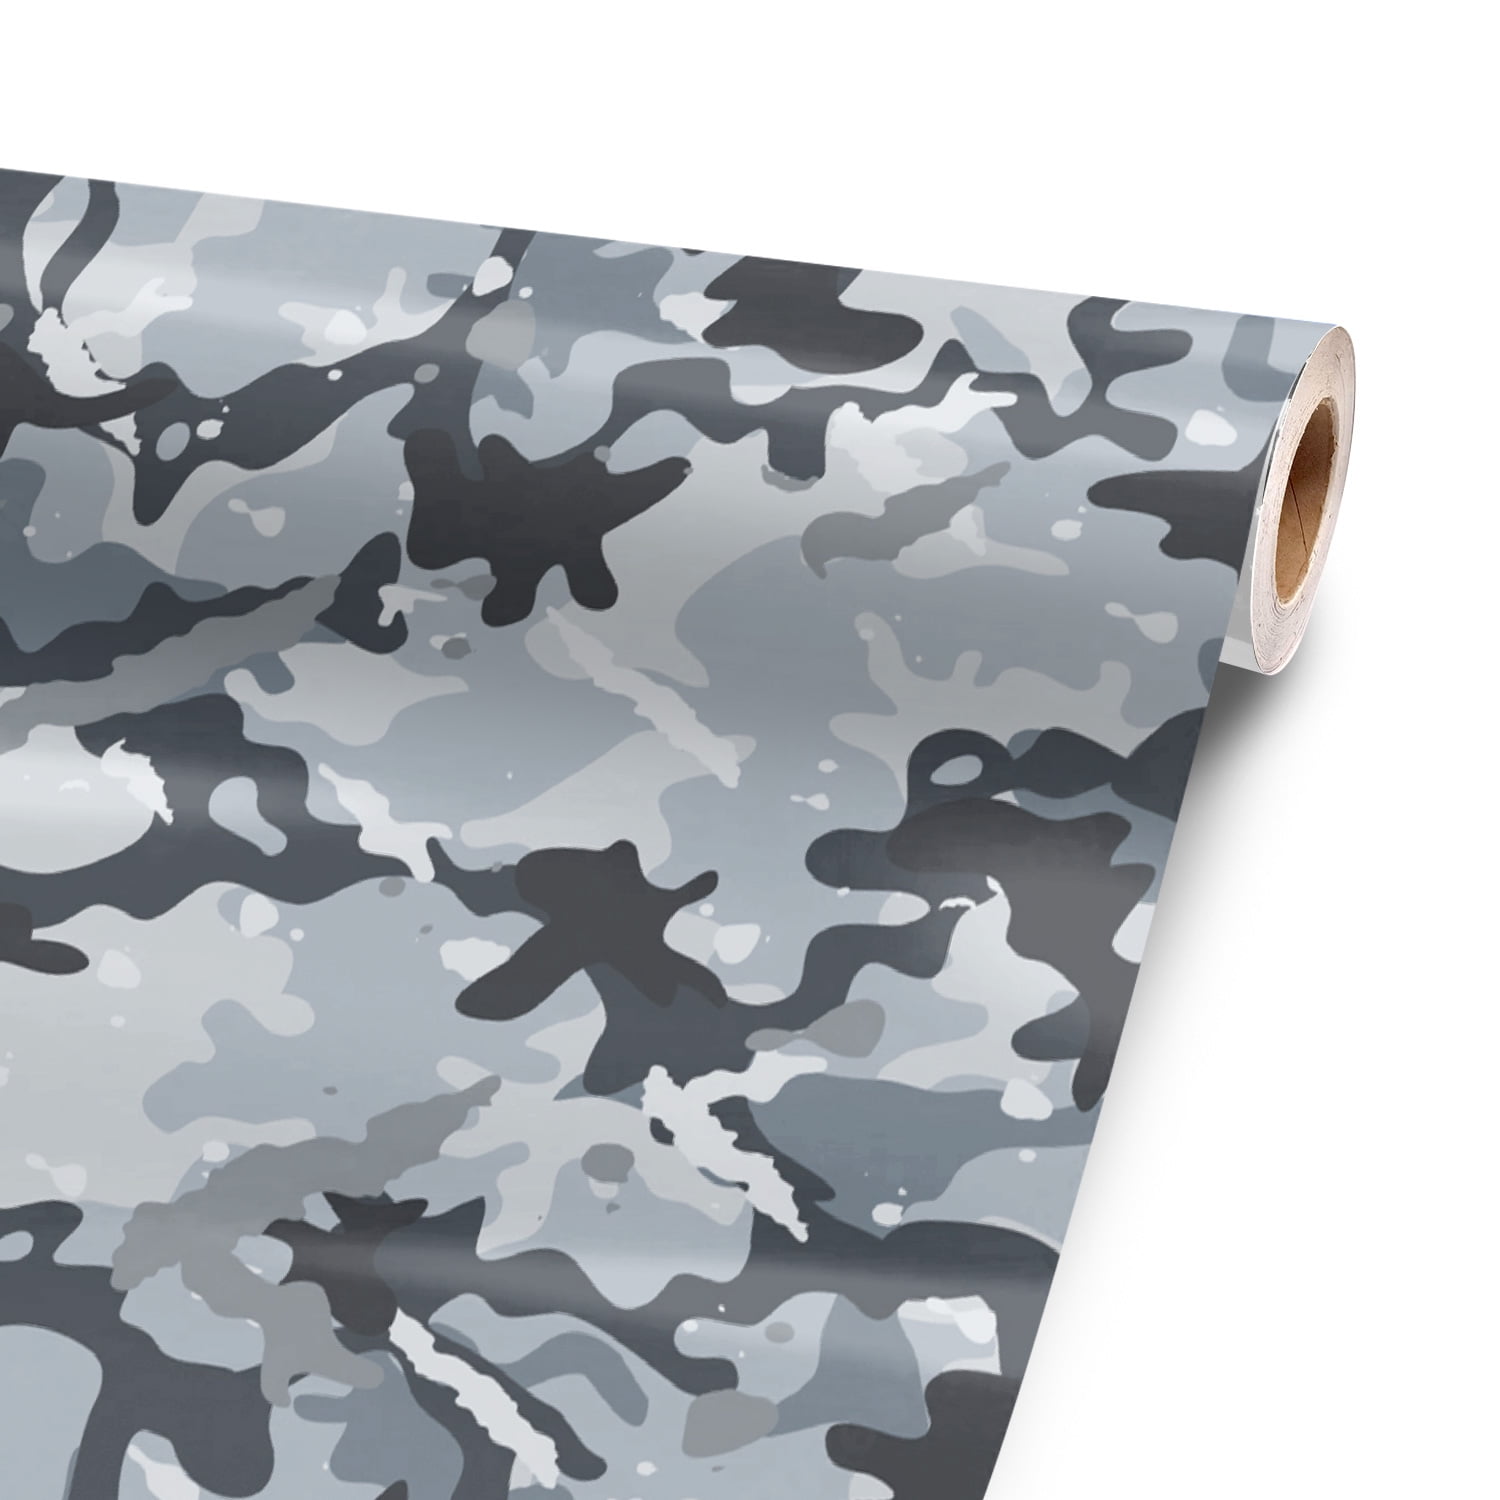 Mono Camo Vinyl Wrap Sheets and Rolls For Large or Custom Items